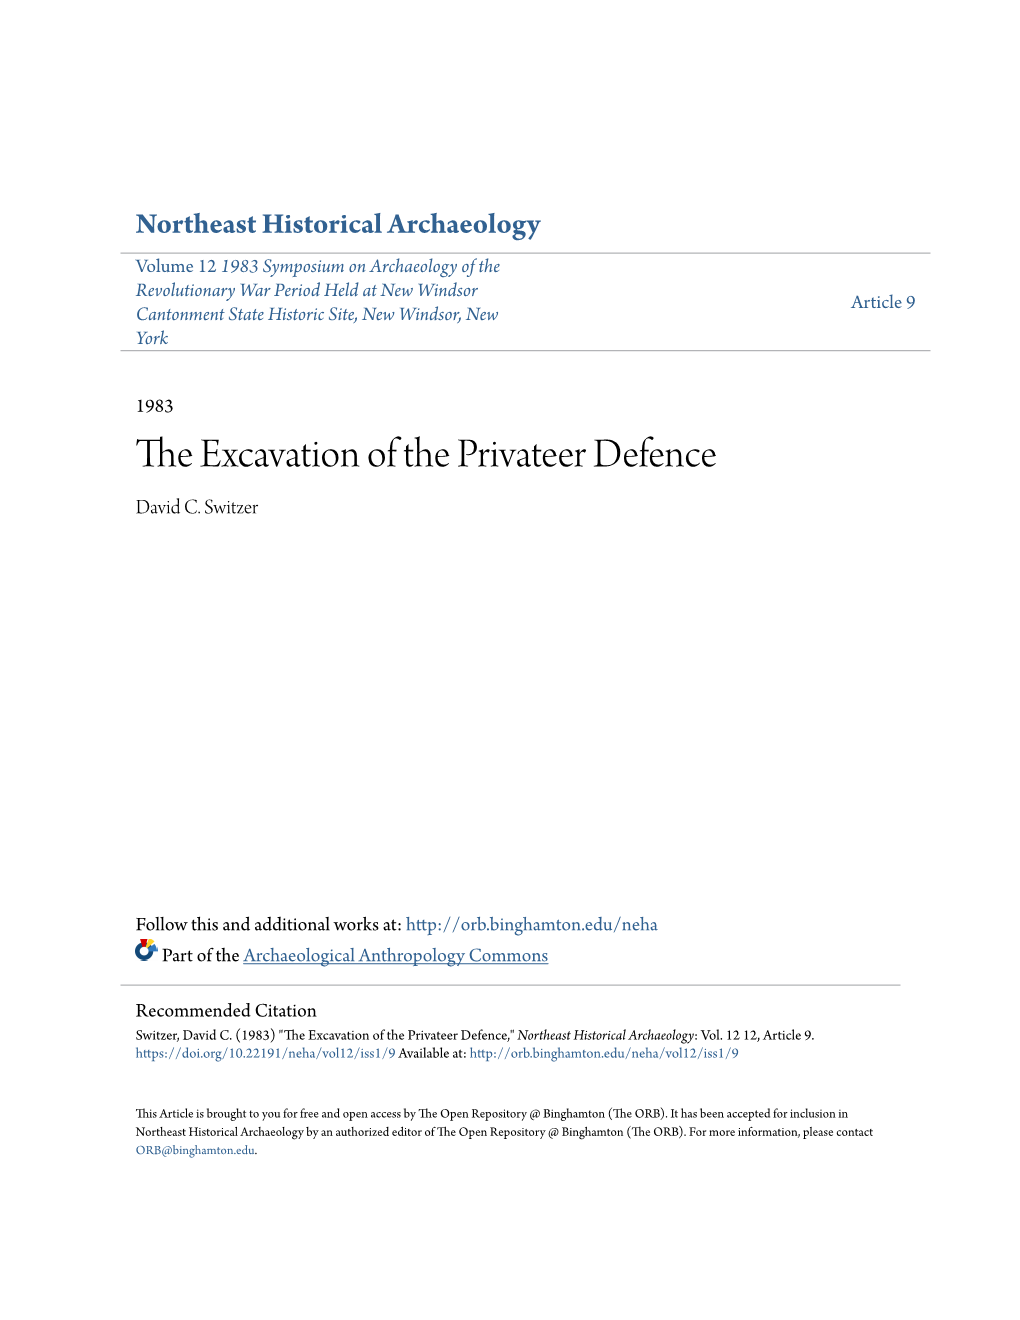 The Excavation of the Privateer Defence David C